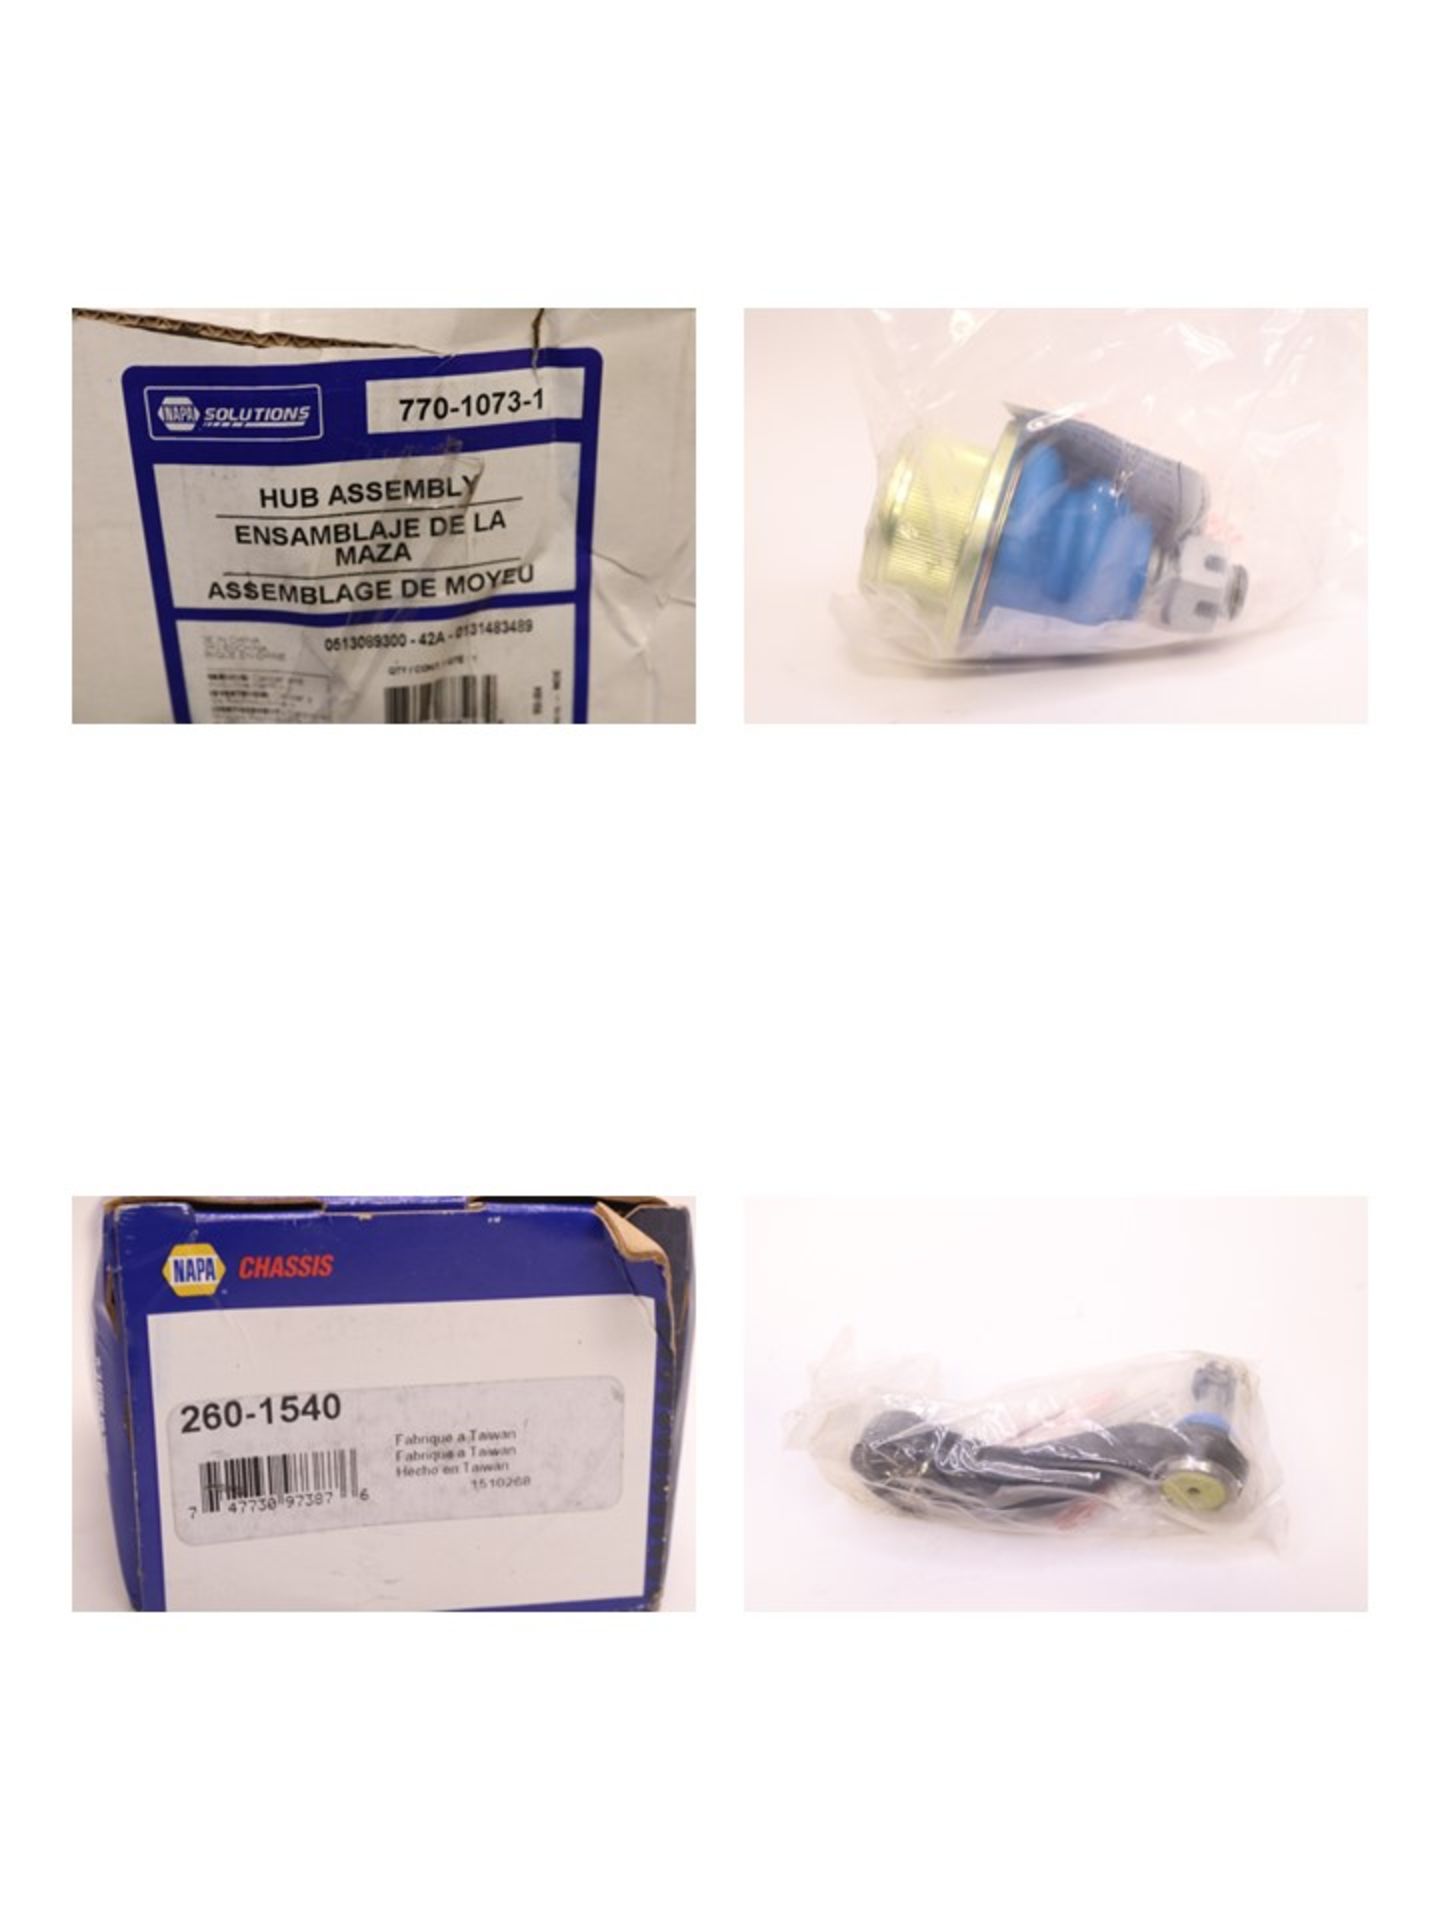 {LOT} 30k Retail Value of "NAPA AUTO PARTS" Items with 385 SKU's and 710+ Piece Quantity - Mostly - Image 88 of 113